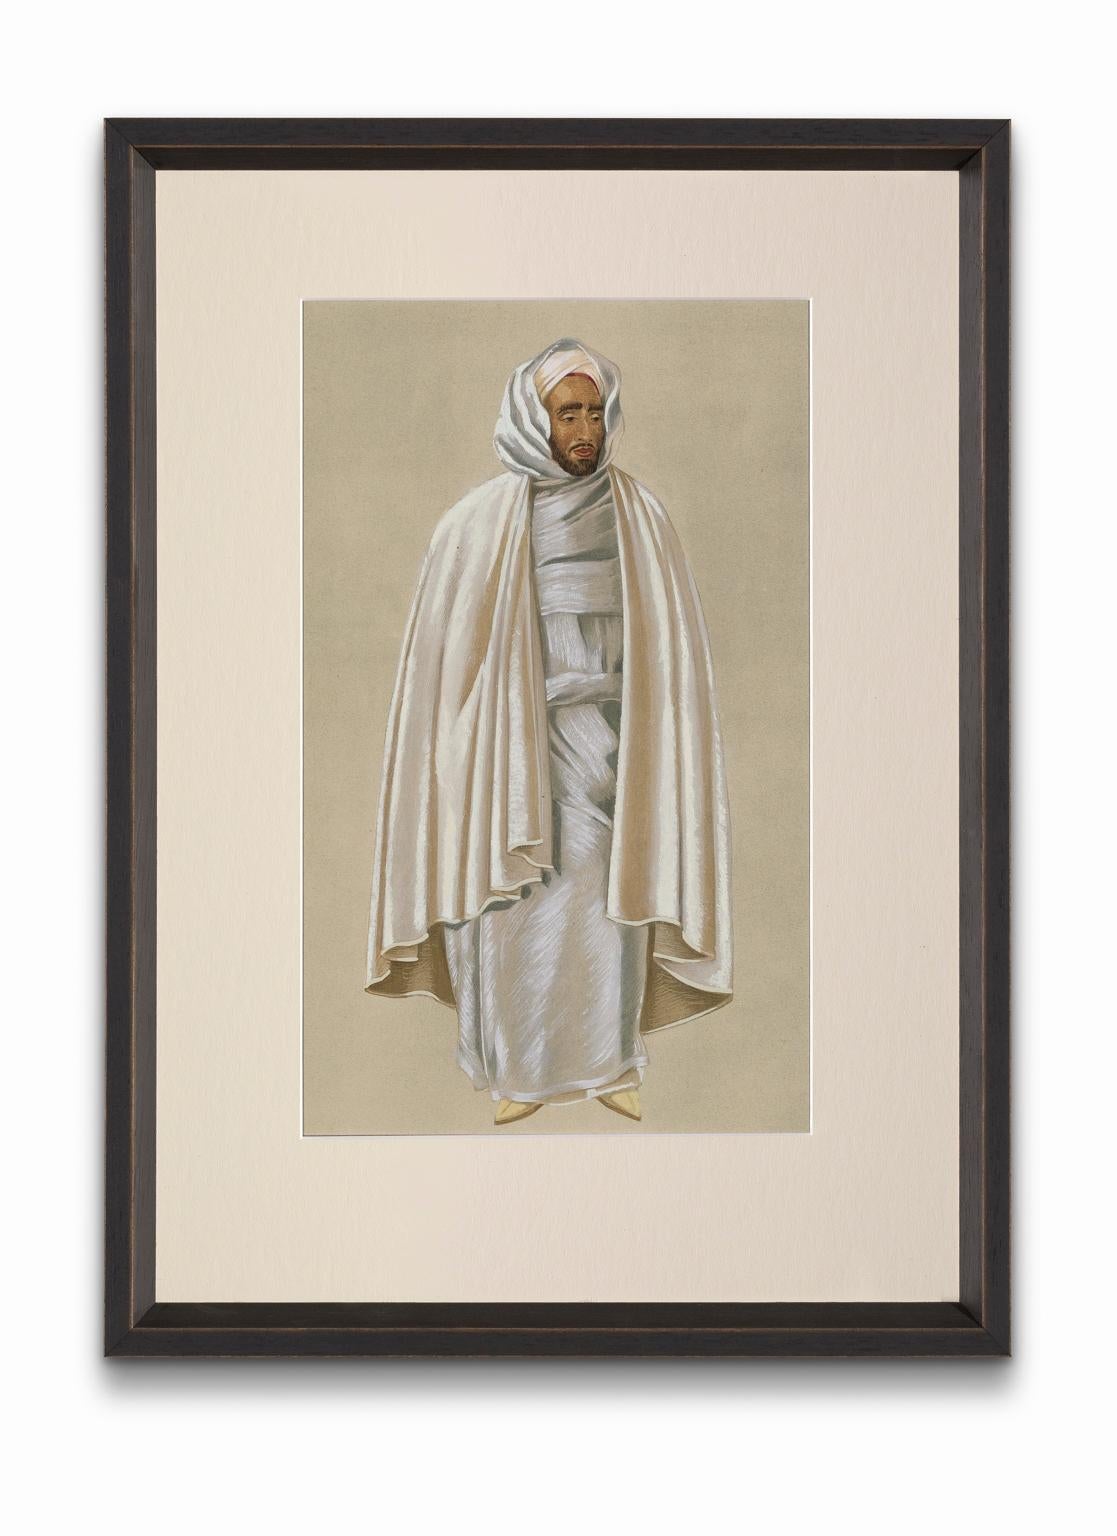 Jean Besancenot Portrait Print - "City Notable" from "Costumes of Morocco", Gouache on Paper